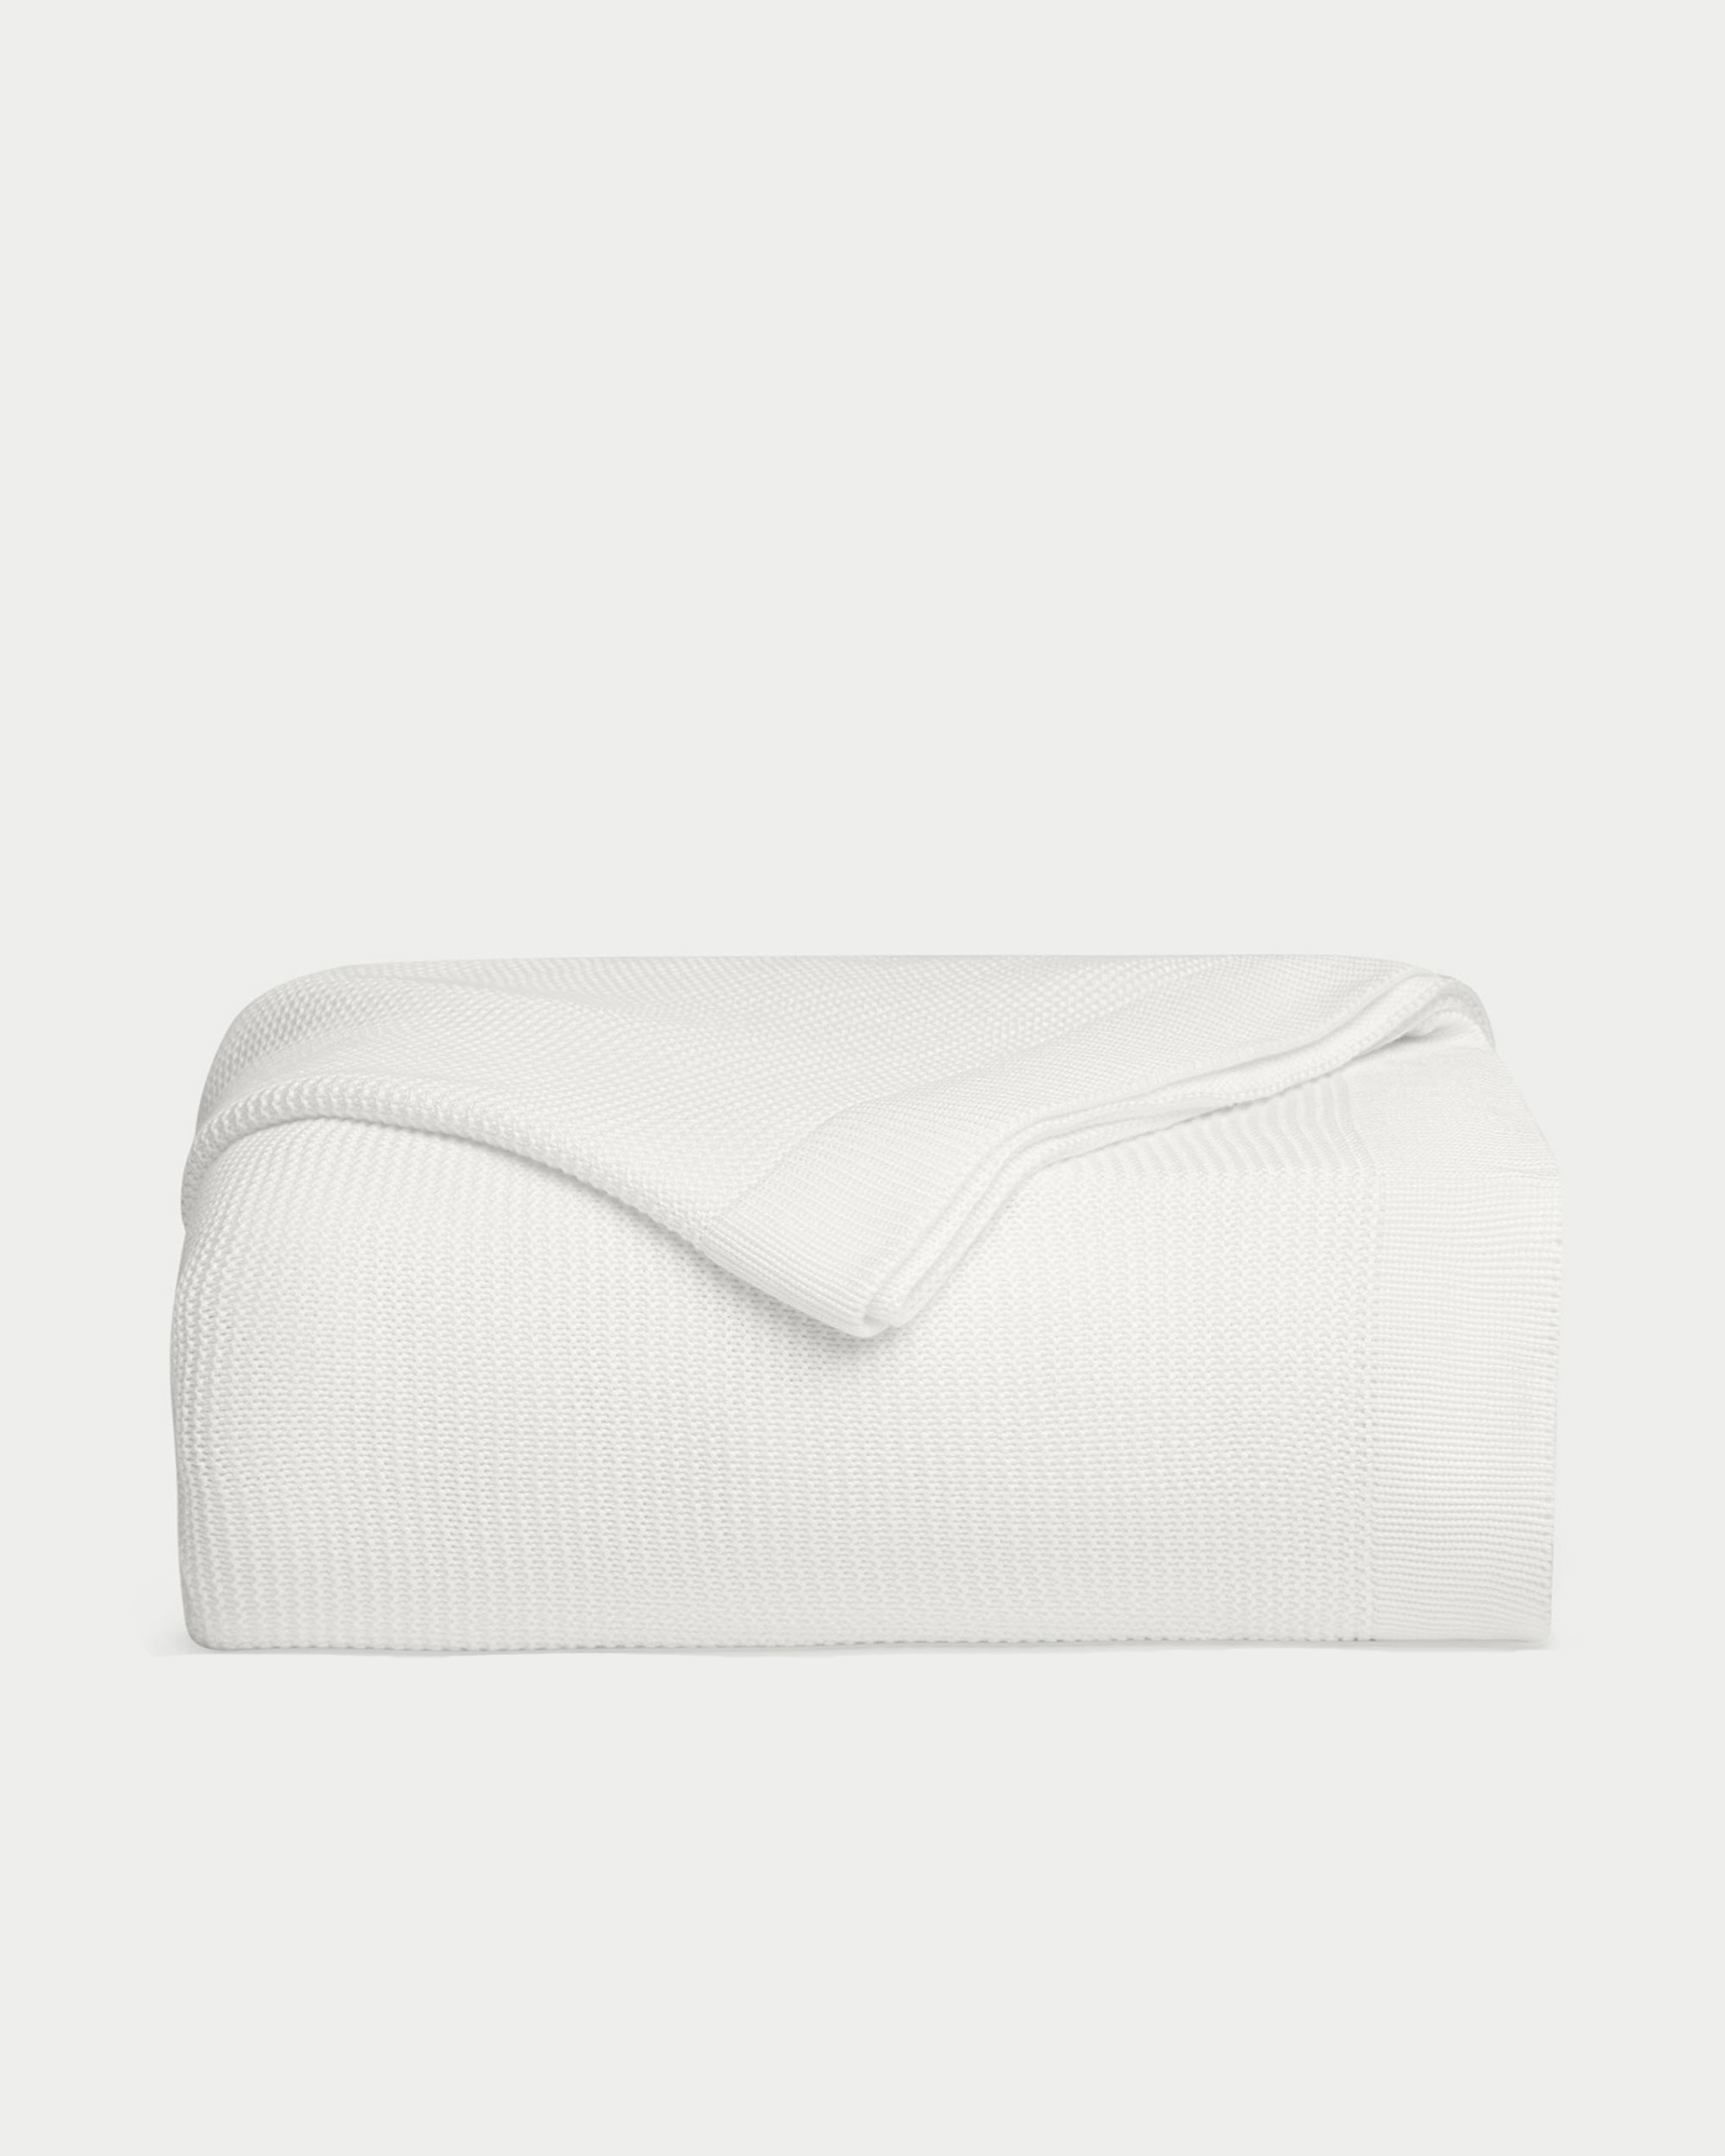 White cloud knit blanket folded with white background |Color:White